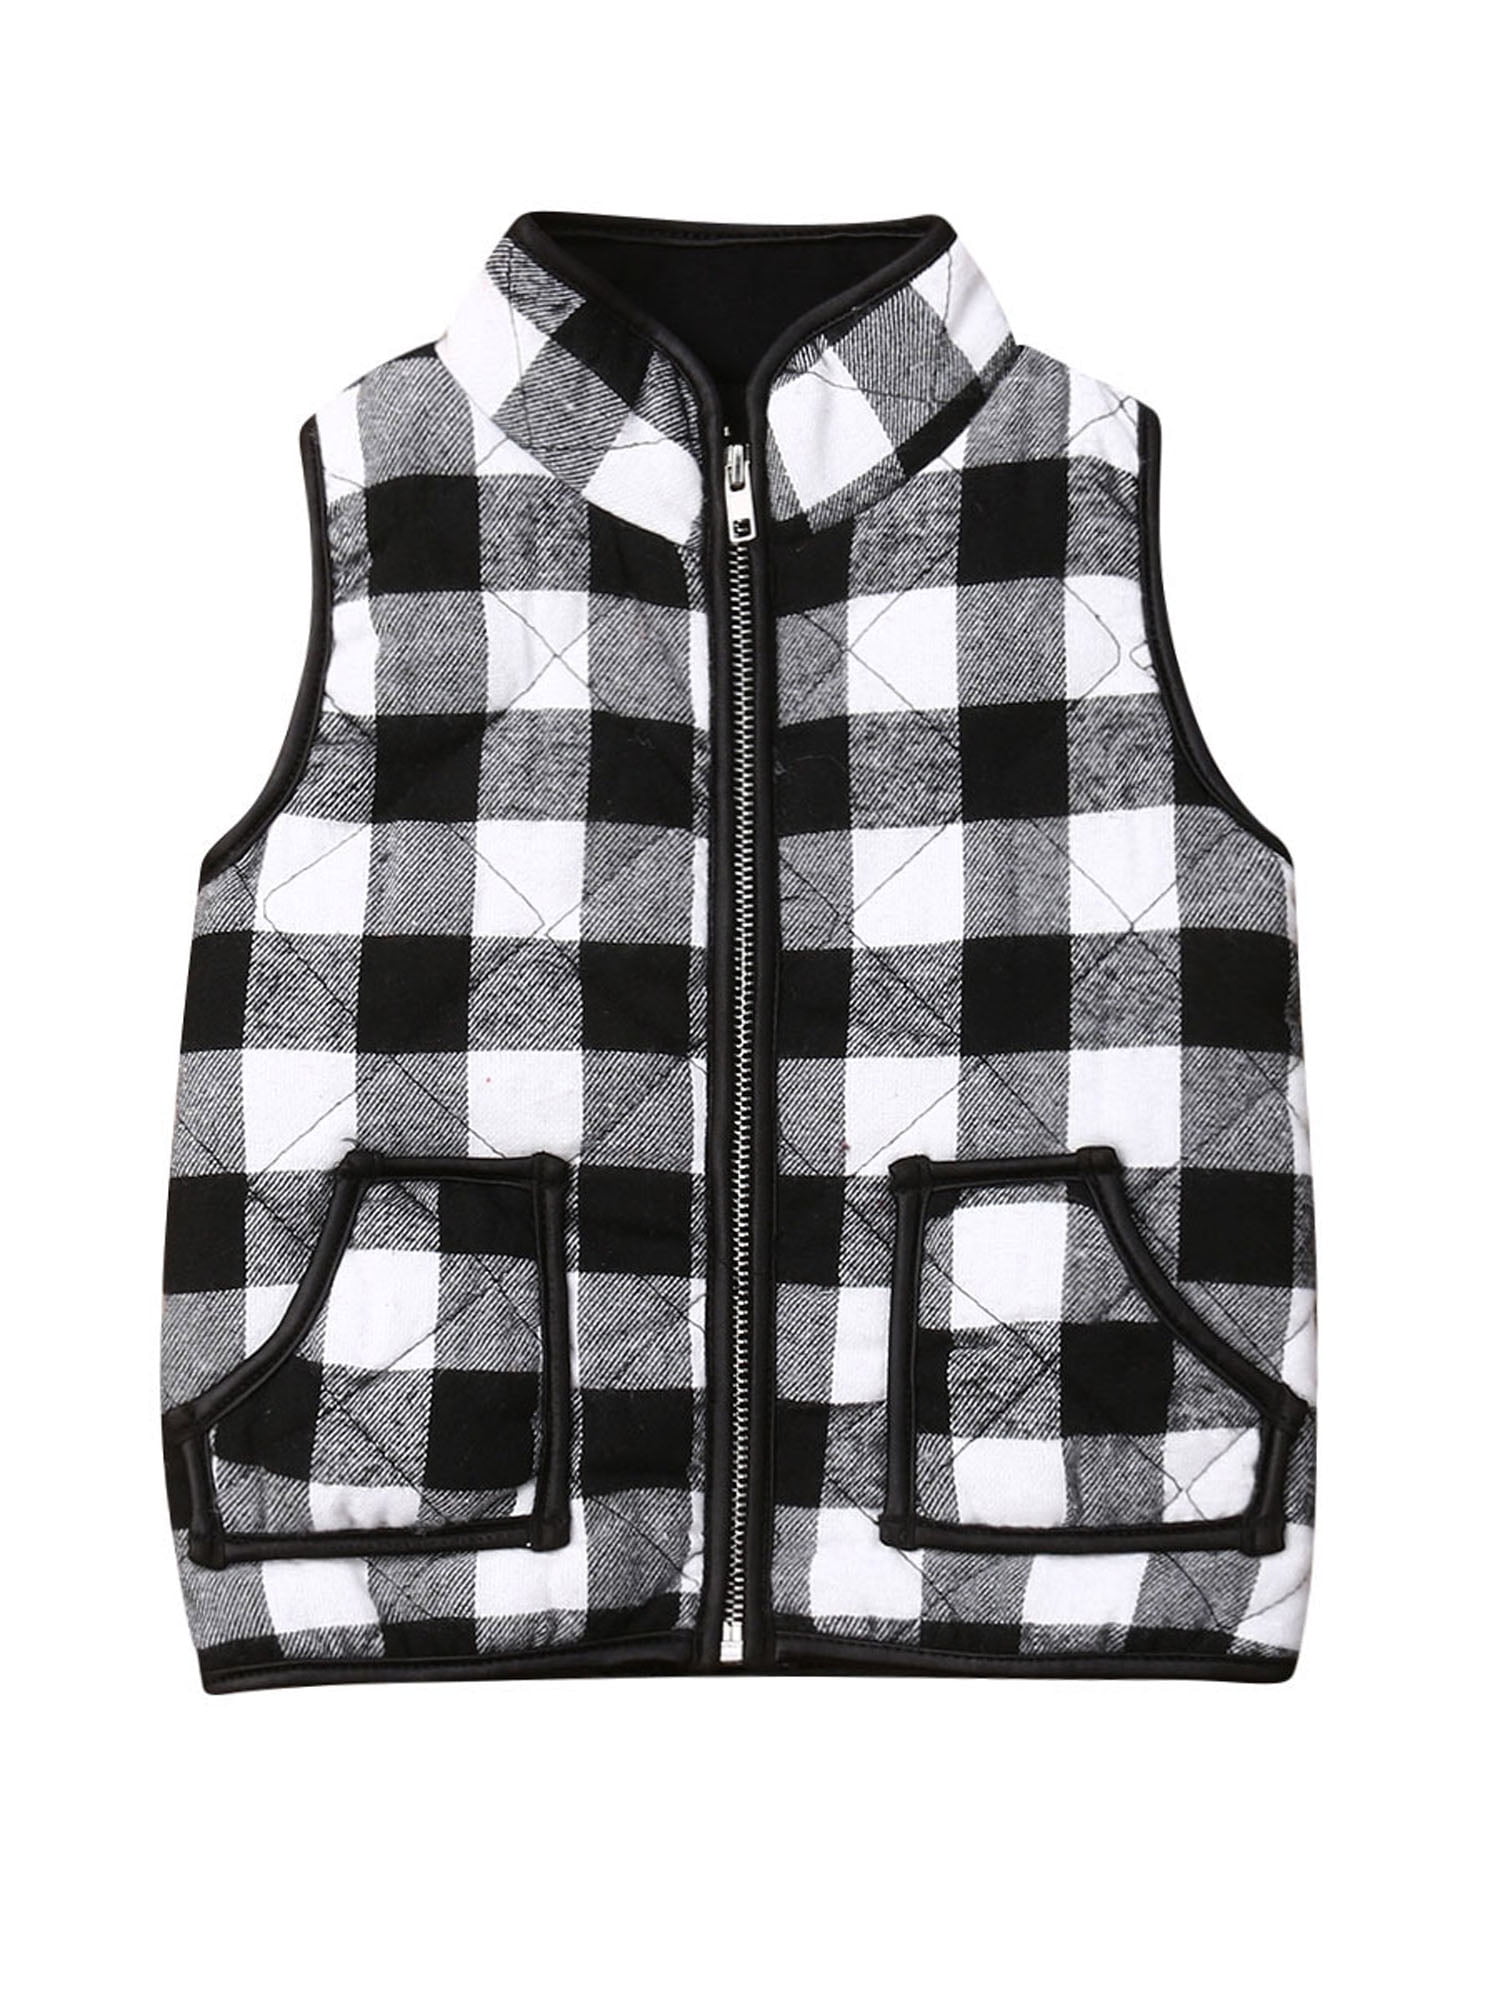 Toddler Kids Baby Girls Vest Coat Plaid Zipper Jacket Christmas Outfits Sleeveless Fall Winter Outwear with Pocket